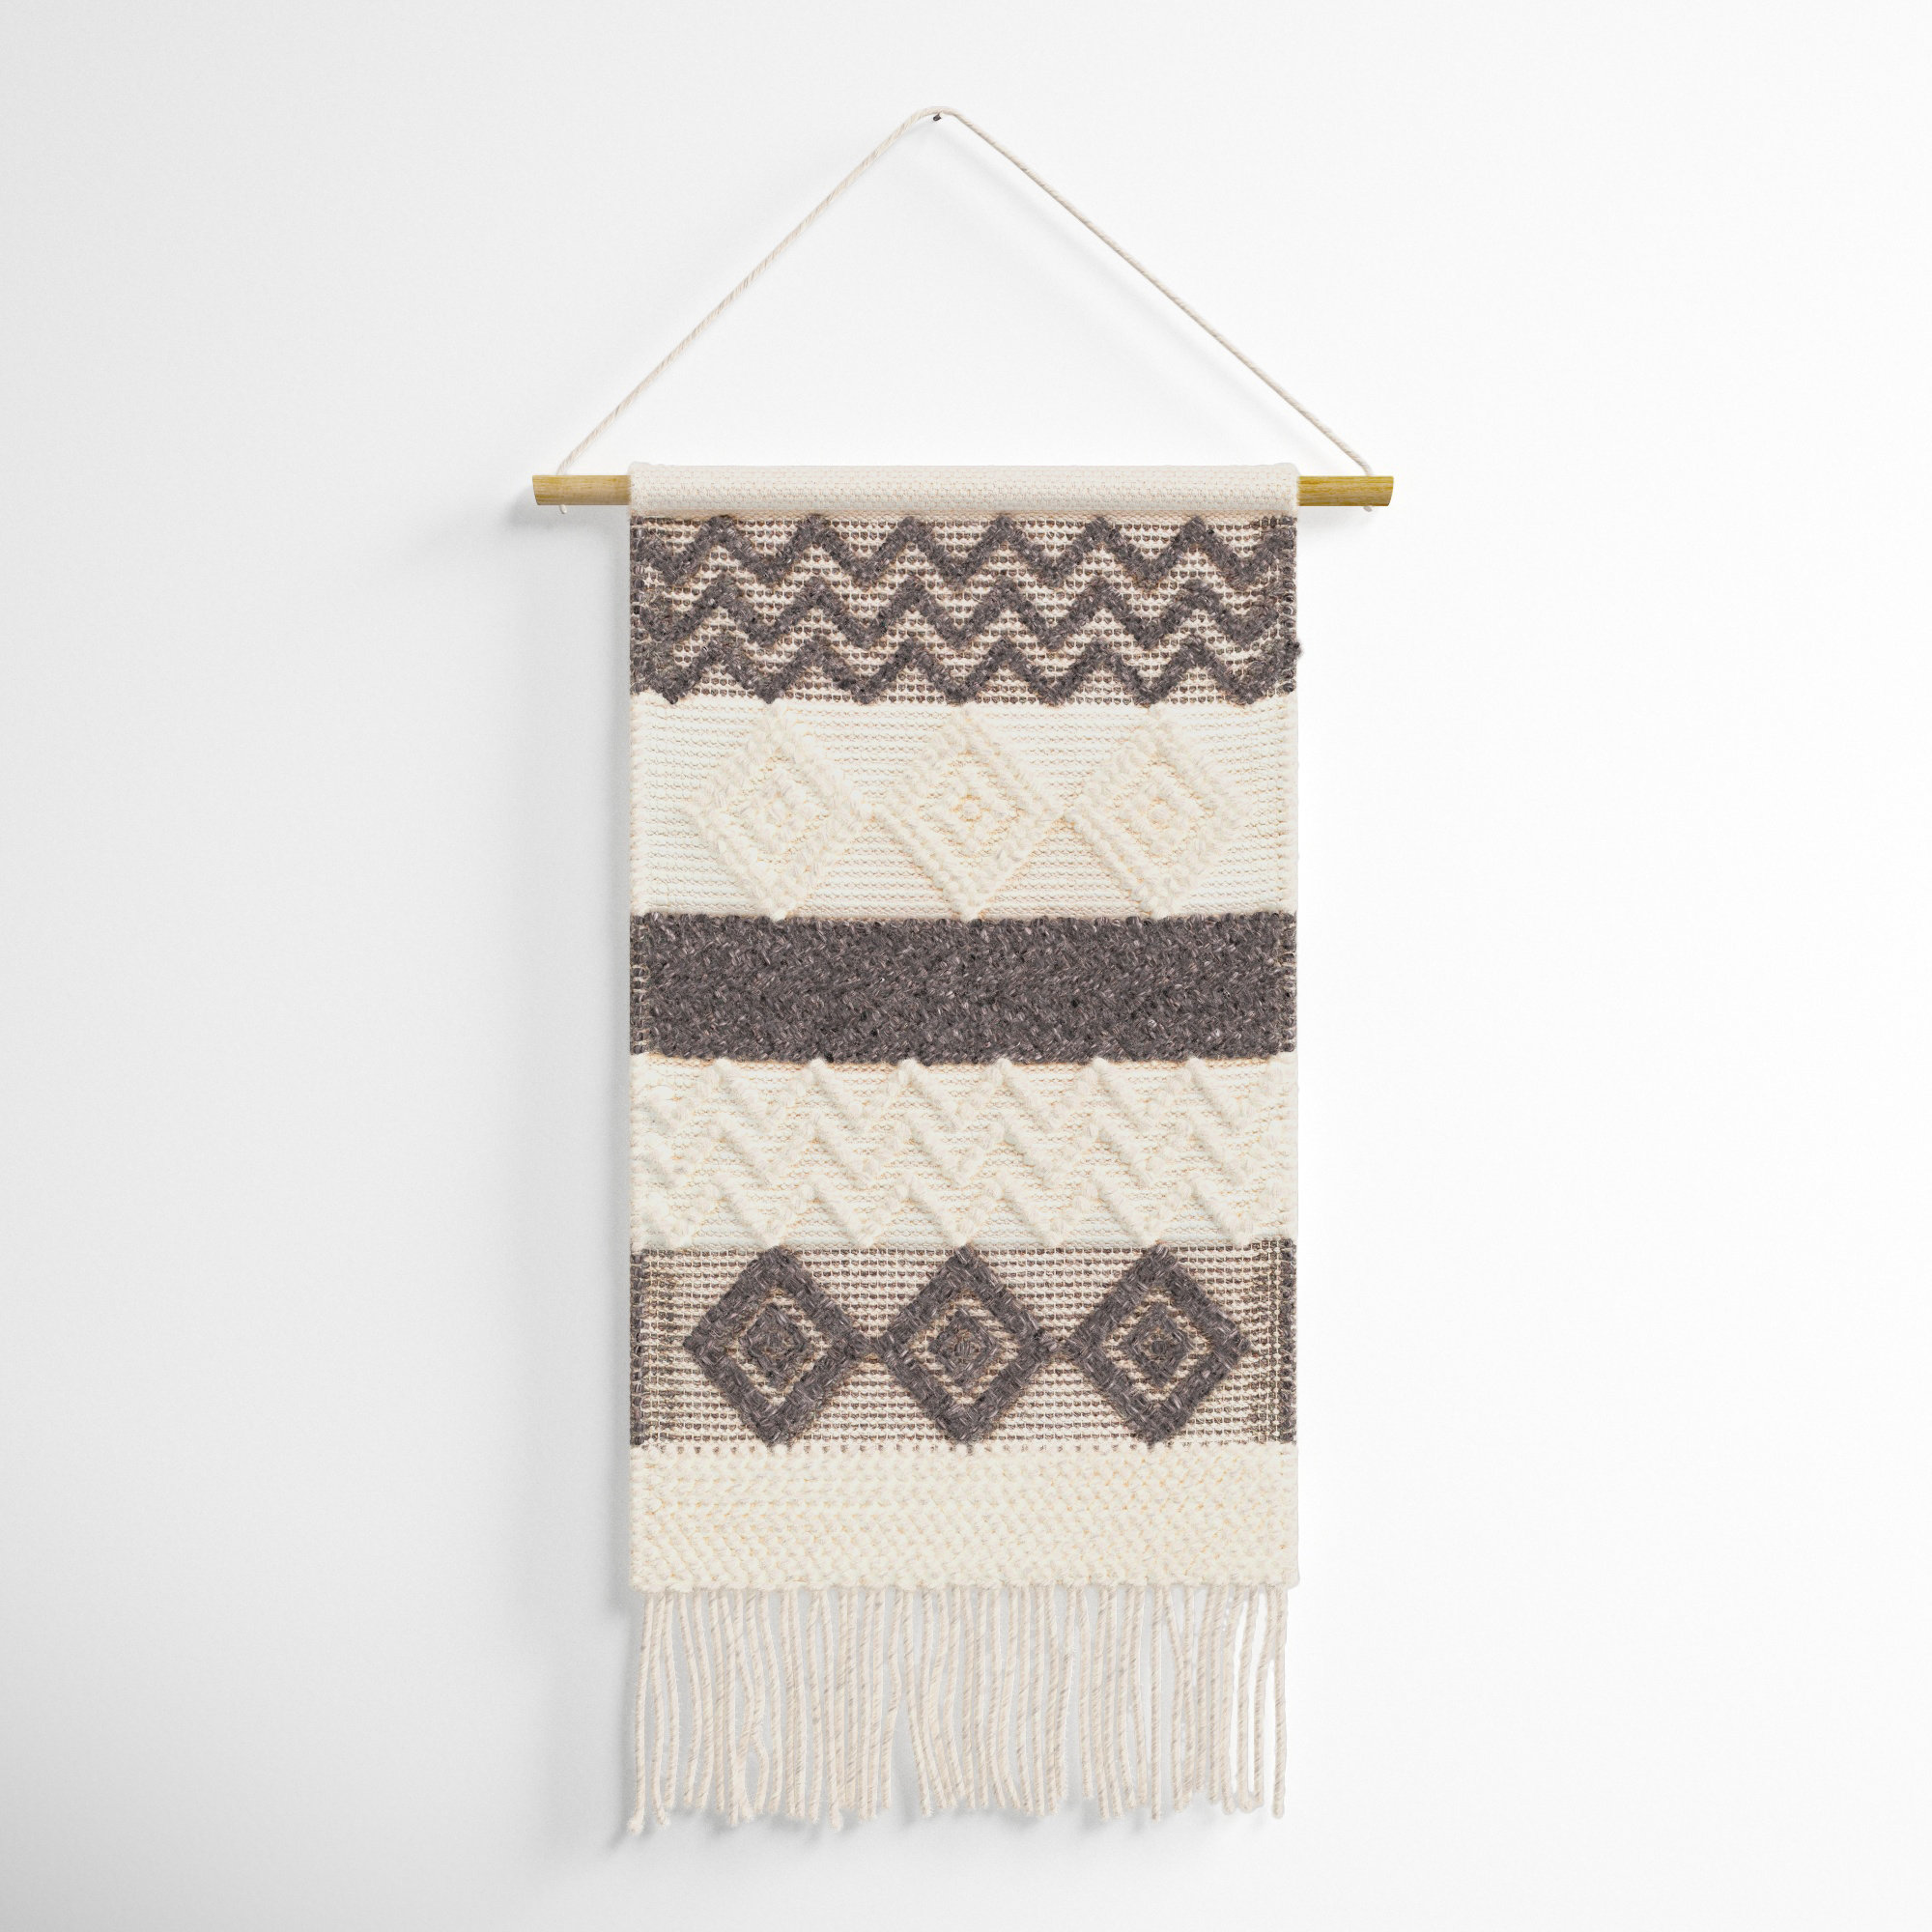 Blended Fabric Wall Hanging with Hanging Accessories Included Langley Street